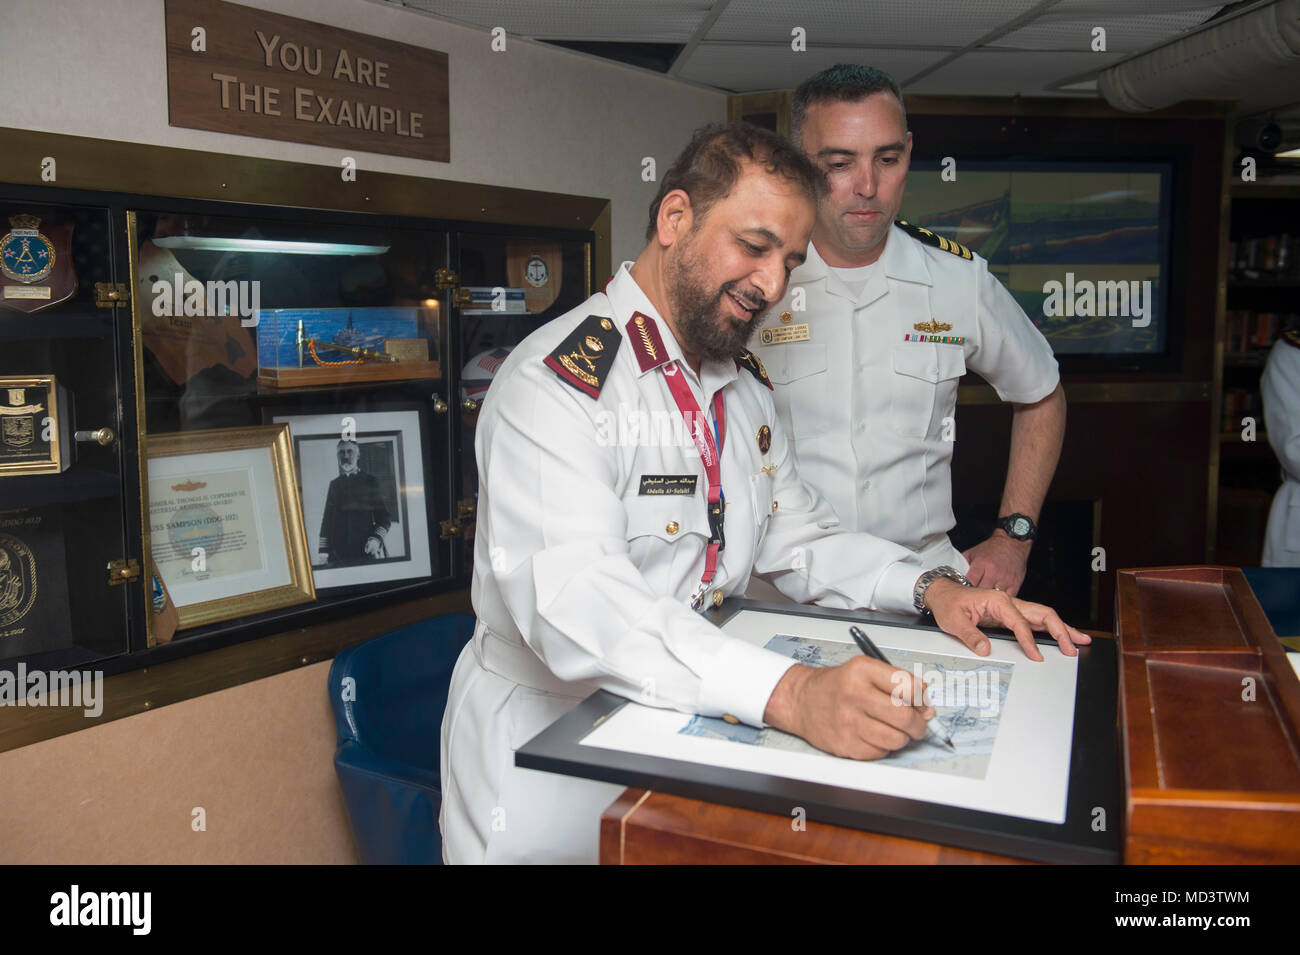 180311-N-OI558-1113 DOHA, Qatar (March 11, 2018) Maj. Gen. Abdulla bin Hassan Al Sulaiti, commander of the Qatar Emiri Naval Forces signs a portrait during his visit aboard the Arleigh Burke-class guided-missile destroyer USS Sampson (DDG 102). Sampson is deployed with the Theodore Roosevelt Carrier Strike Group to the U.S. 5th Fleet area of operations in support of maritime operations to reassure allies and partners and preserve the freedom of navigation and the free flow of commerce in the region. (U.S. Navy photo by Mass Communication Specialist 3rd Class Chanel L. Turner/Released) Stock Photo